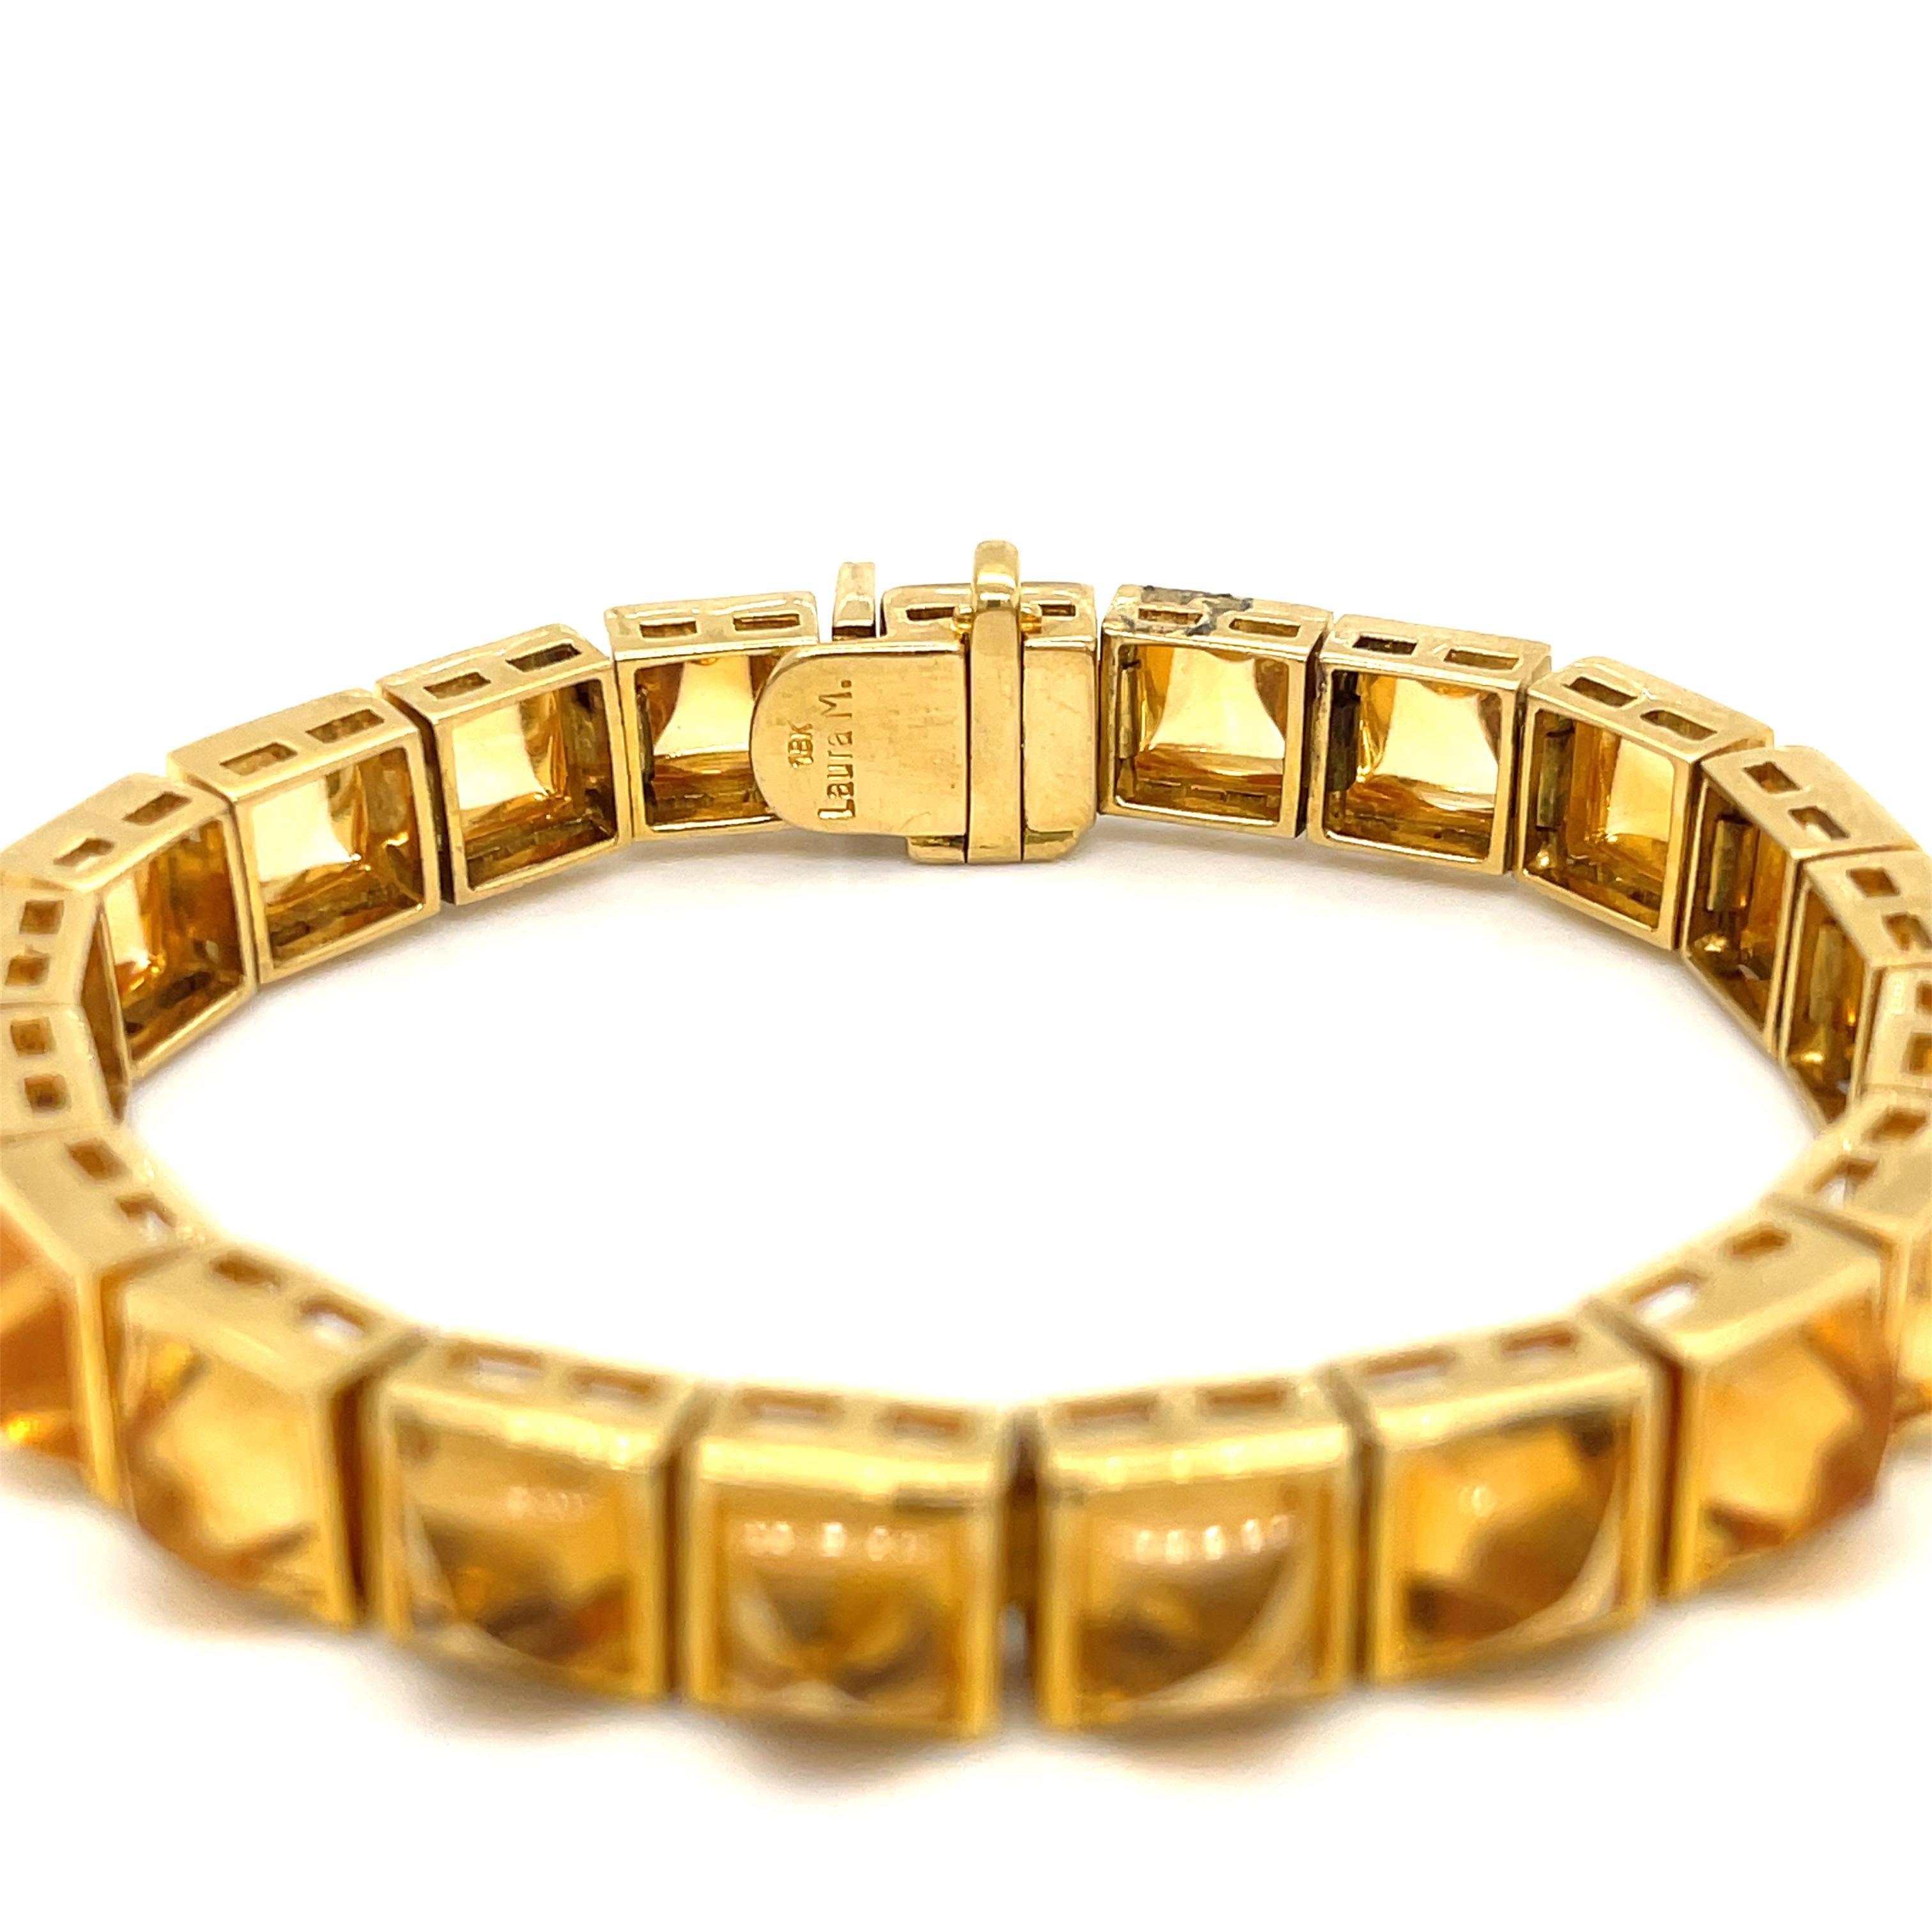 Laura Munder Citrine Bracelet in 18K Yellow Gold. The bracelet features 21 sugarloaf cabochon cut citrines. 
7